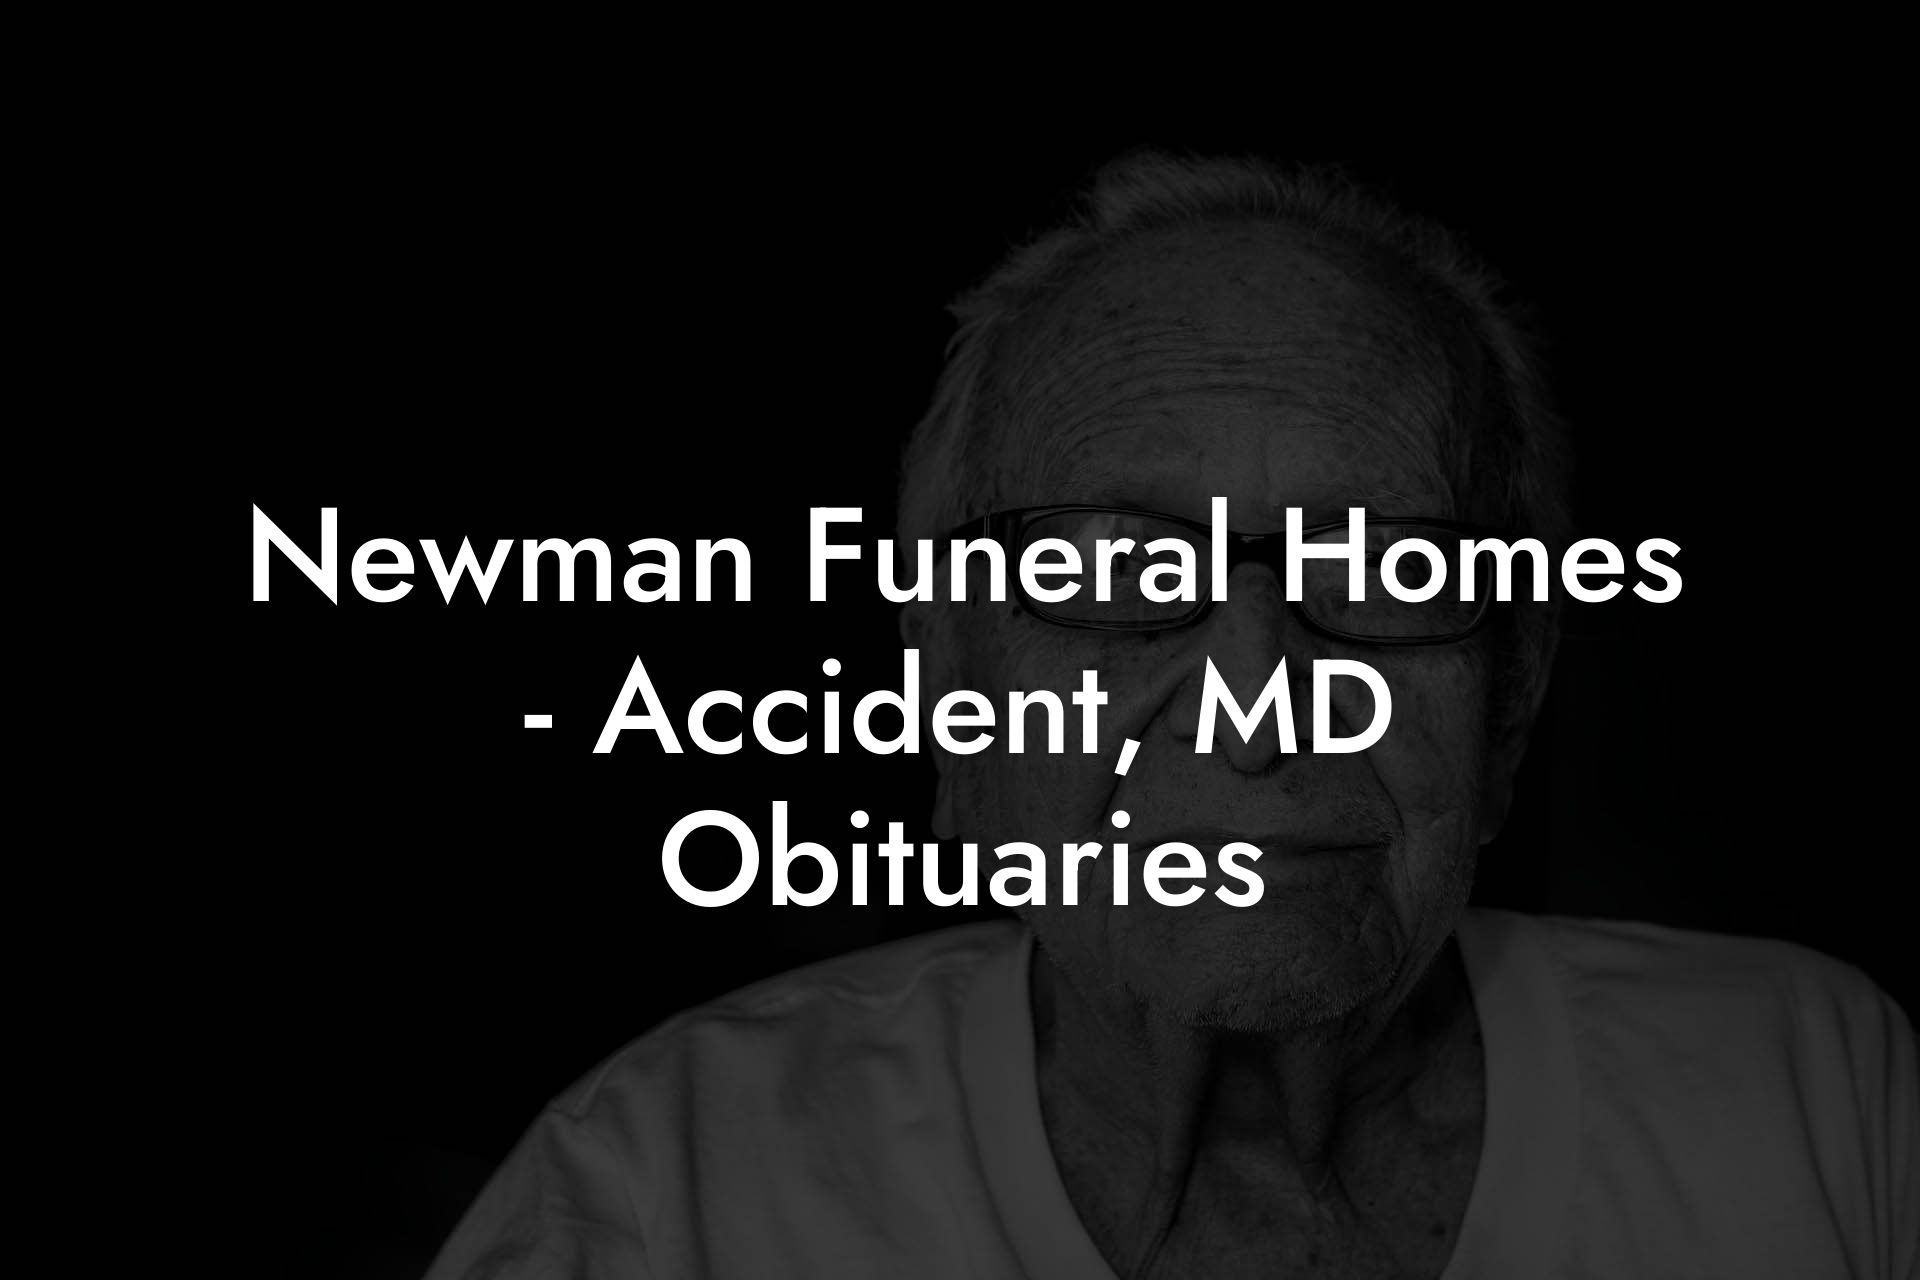 Newman Funeral Homes - Accident, MD Obituaries